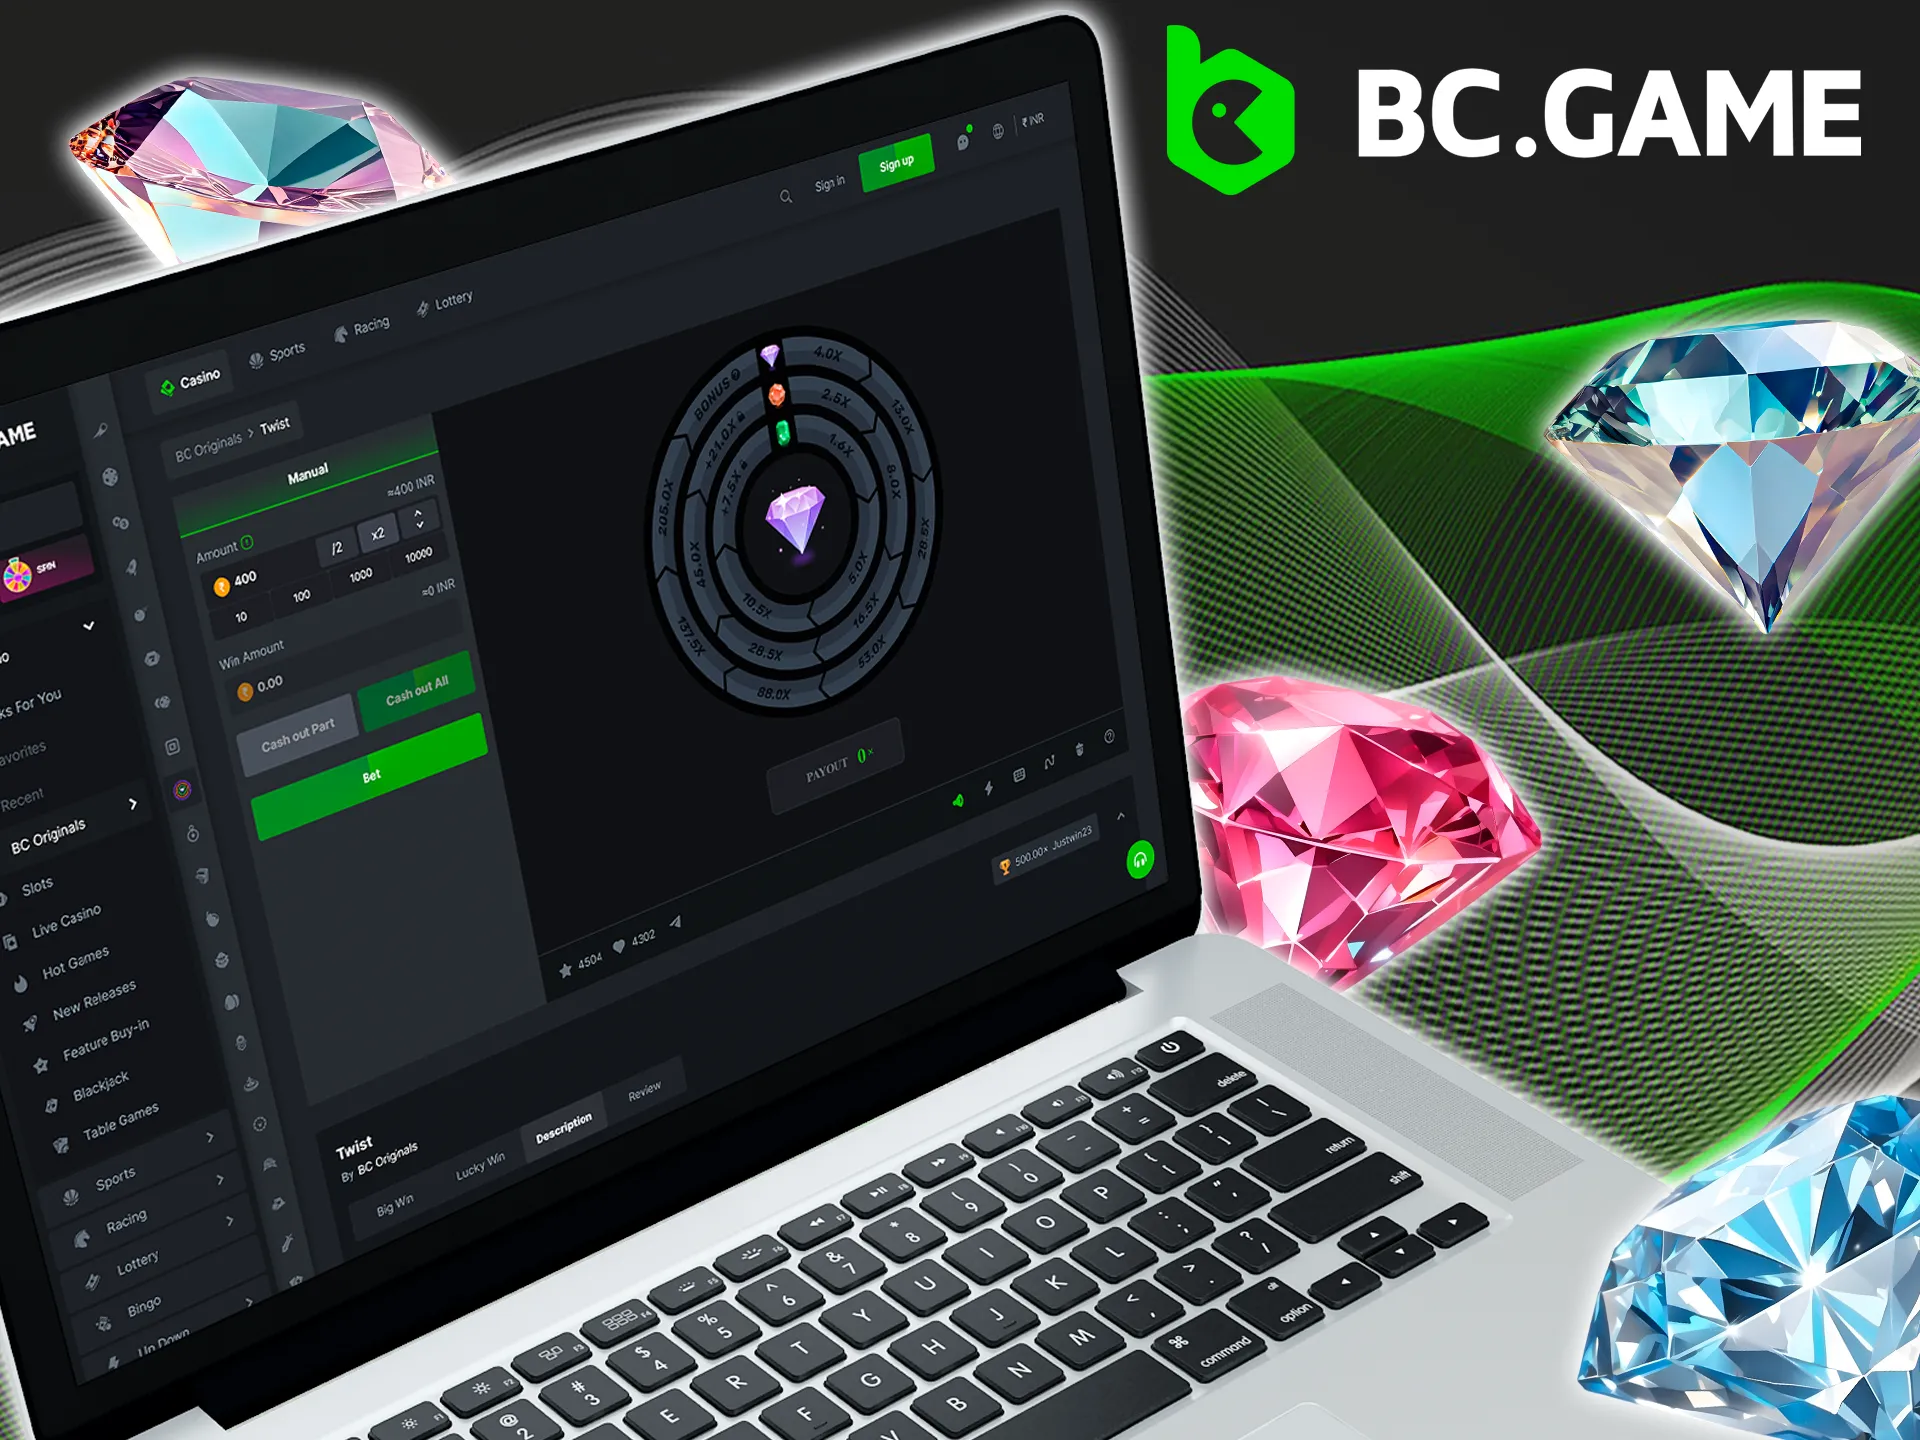 Create your BC Game account and have fun playing Twist.